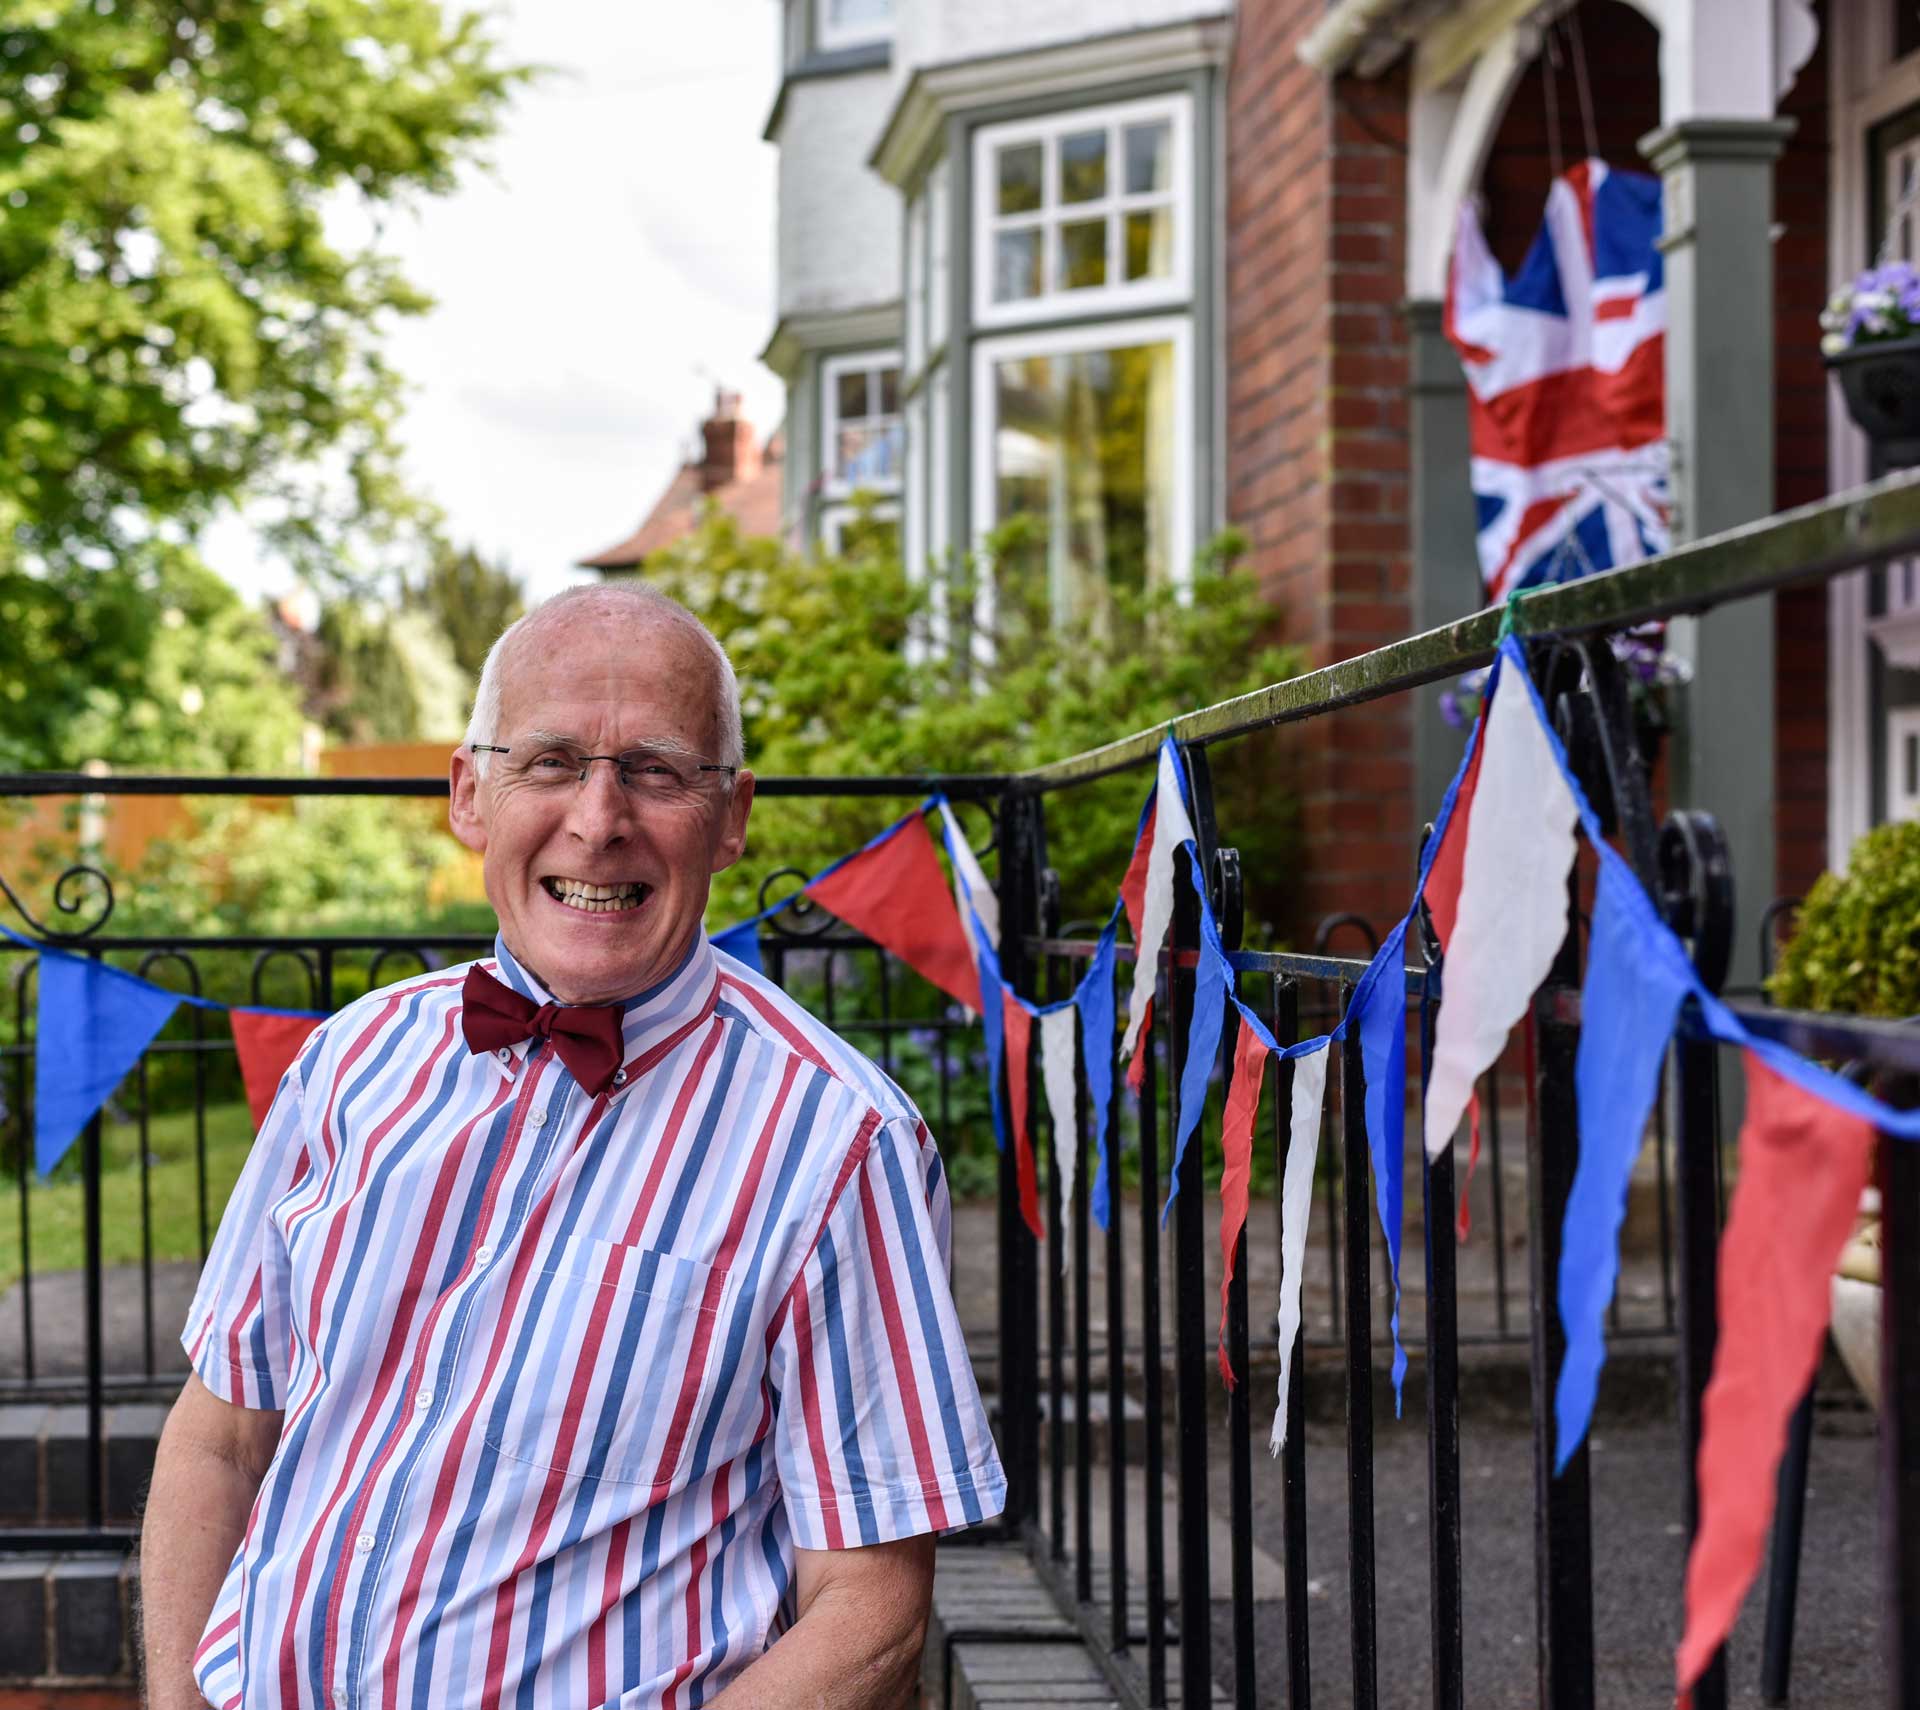 VE Day 75, Leominster, 8th May 2020